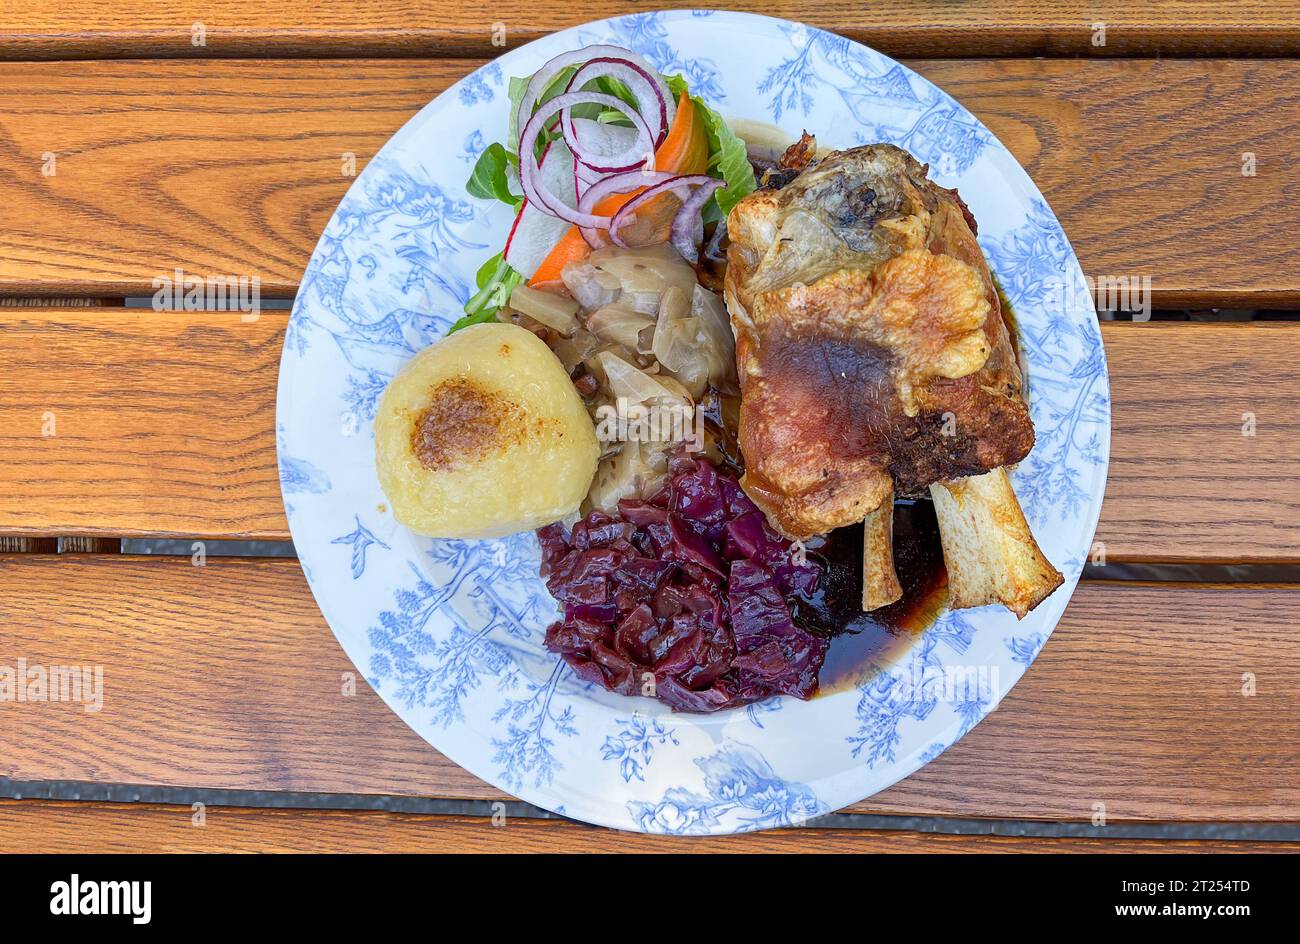 Overhead view of traditional Bavarian roast pork, potato, cabbage and salad Stock Photo